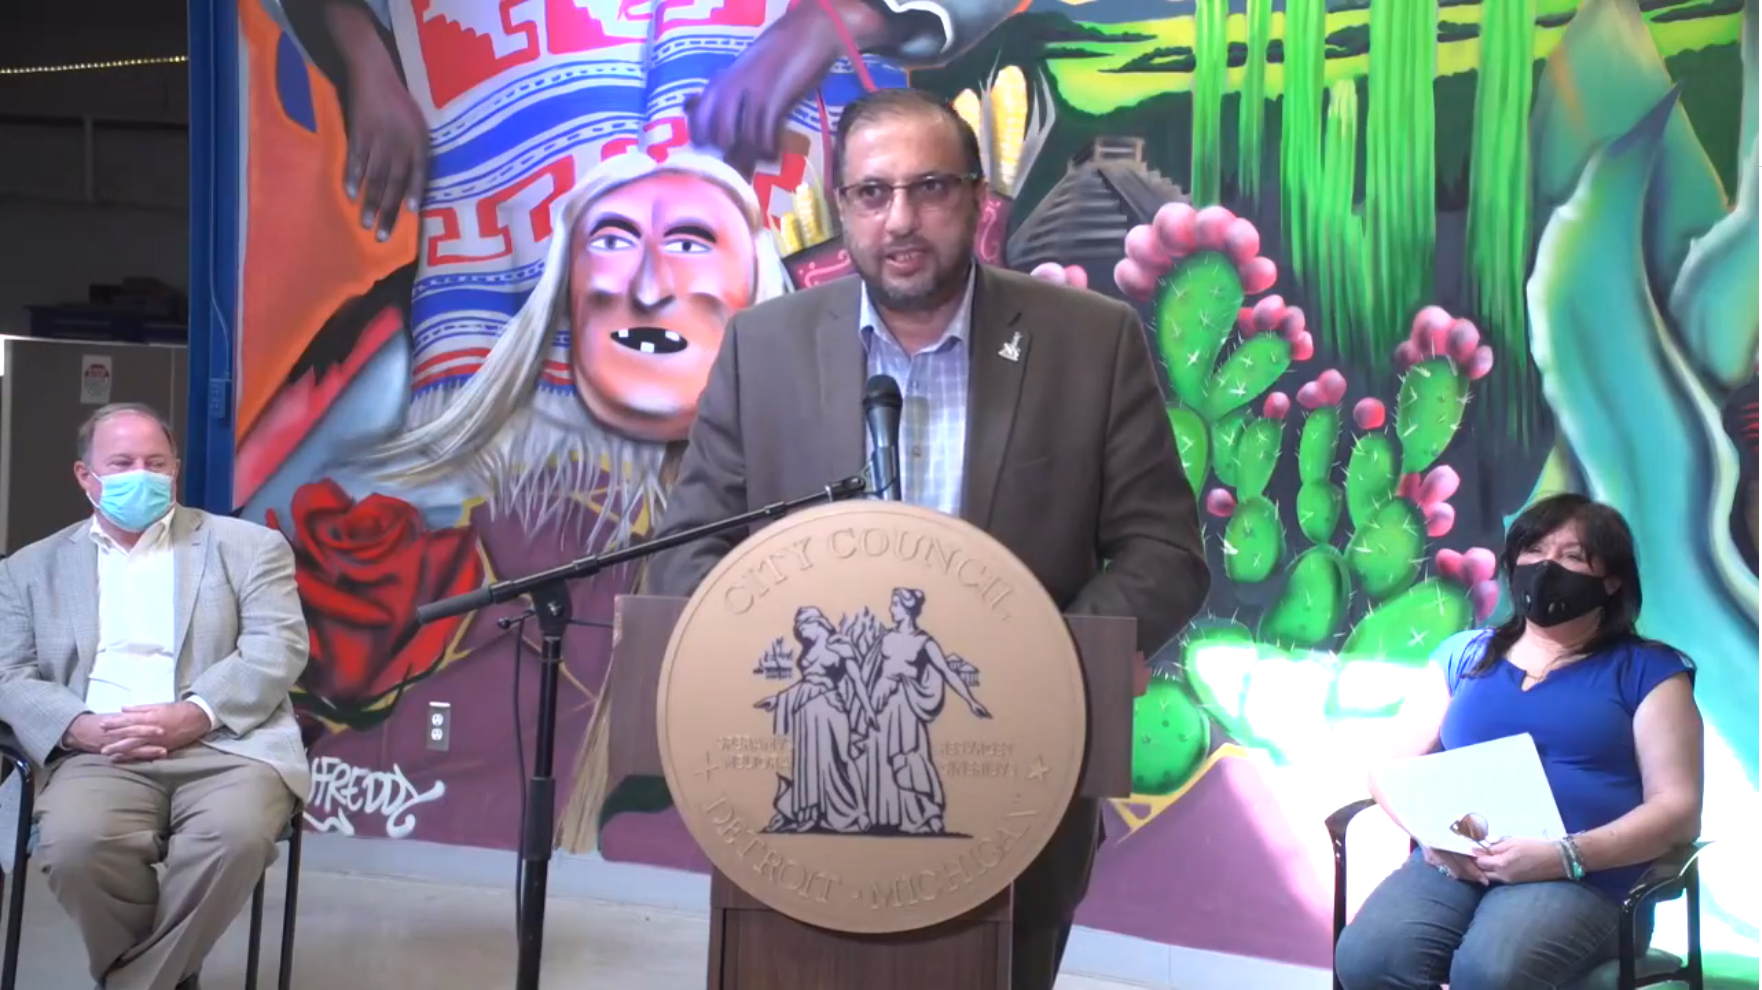 Sufian Nebahn the executive director of the Islamic Center of Detroit (ICD) speaking at the press conference announcing the grant to help undocumented Detroit residents. (ICD) is one of the centers designated for undocumented to seek help.